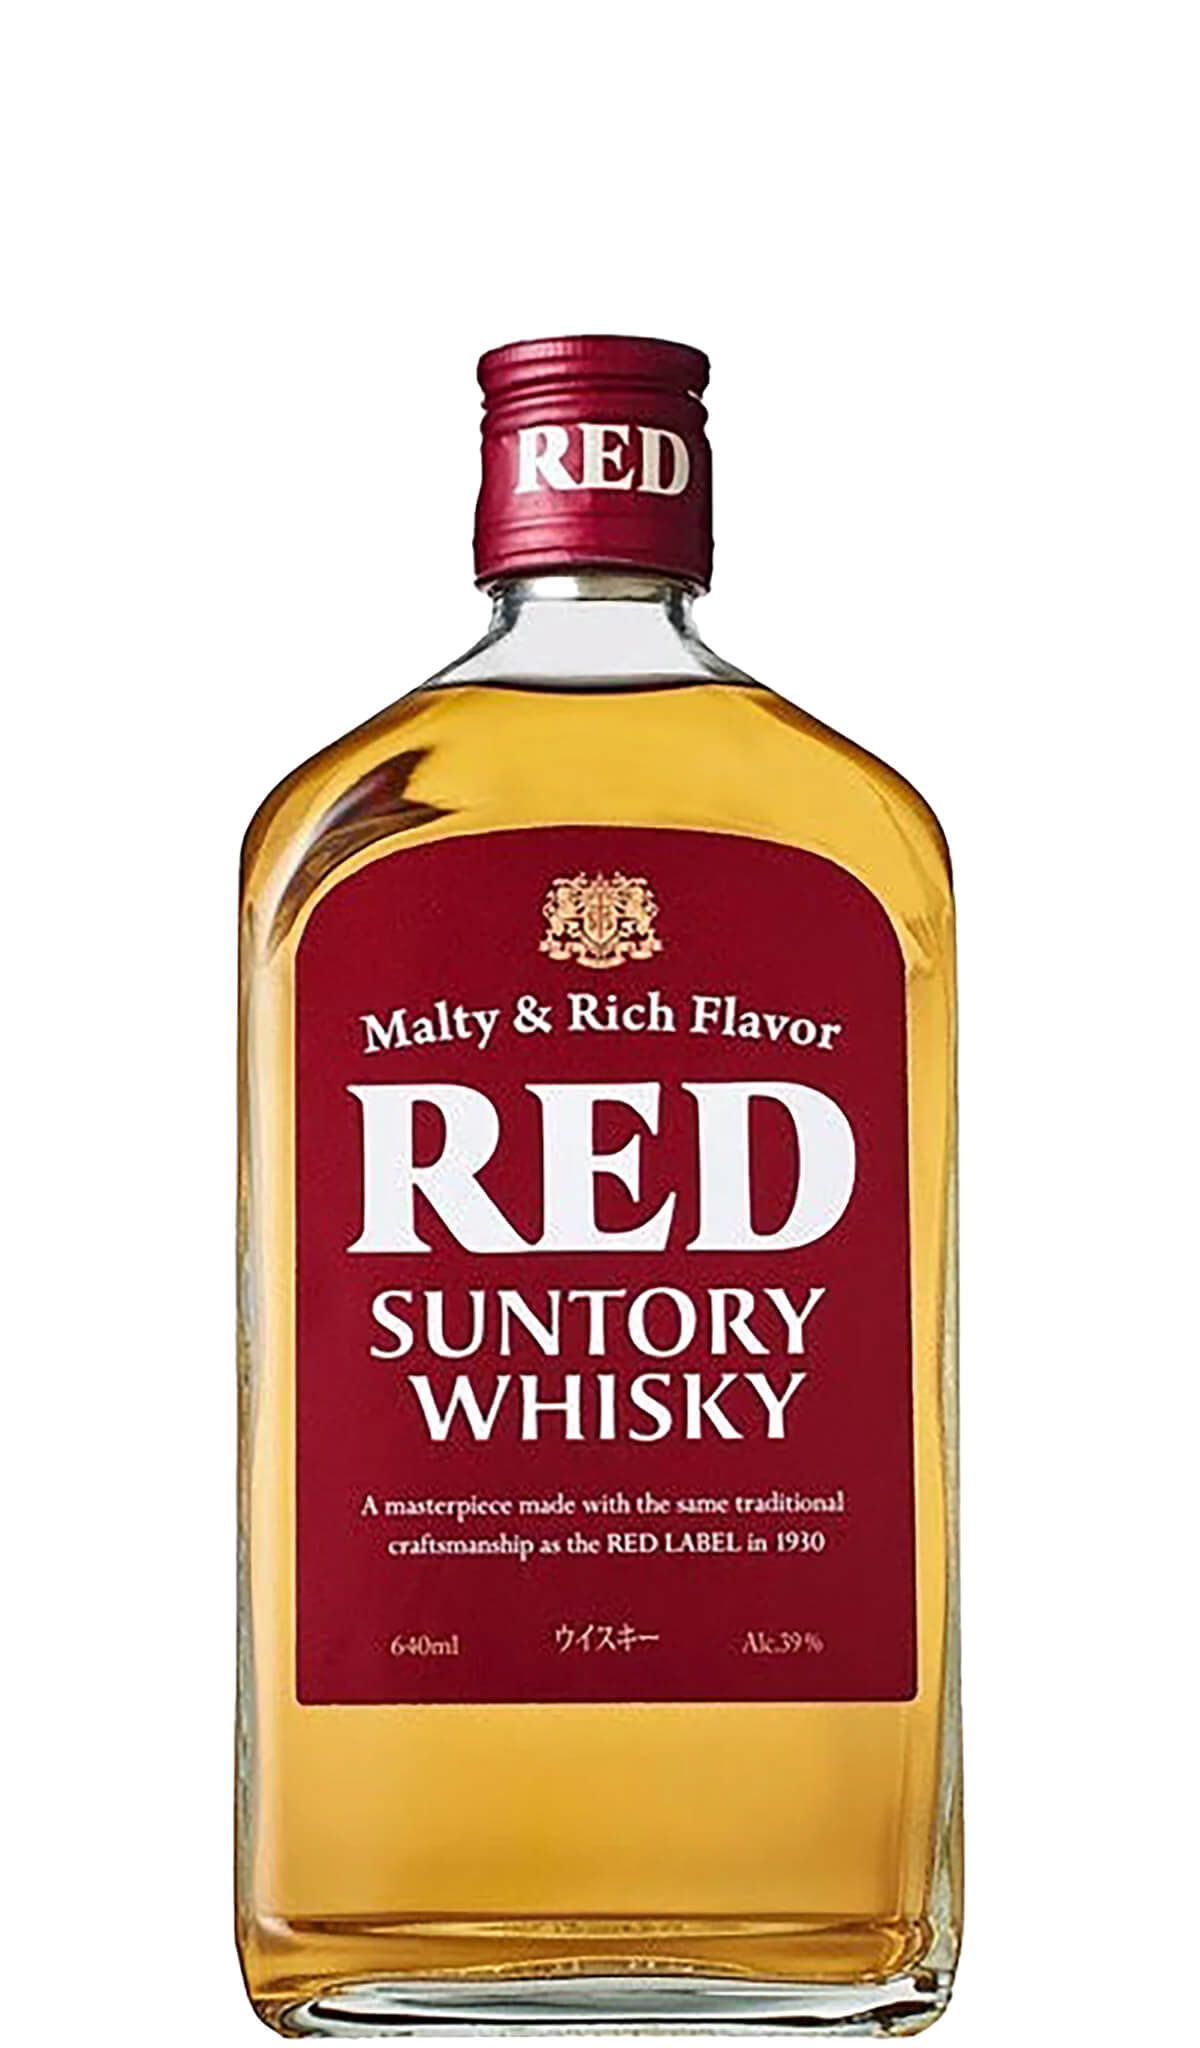 Find out more, explore the range and buy Suntory Red Japanese Whisky 640mL available online at Wine Sellers Direct - Australia's independent liquor specialists.